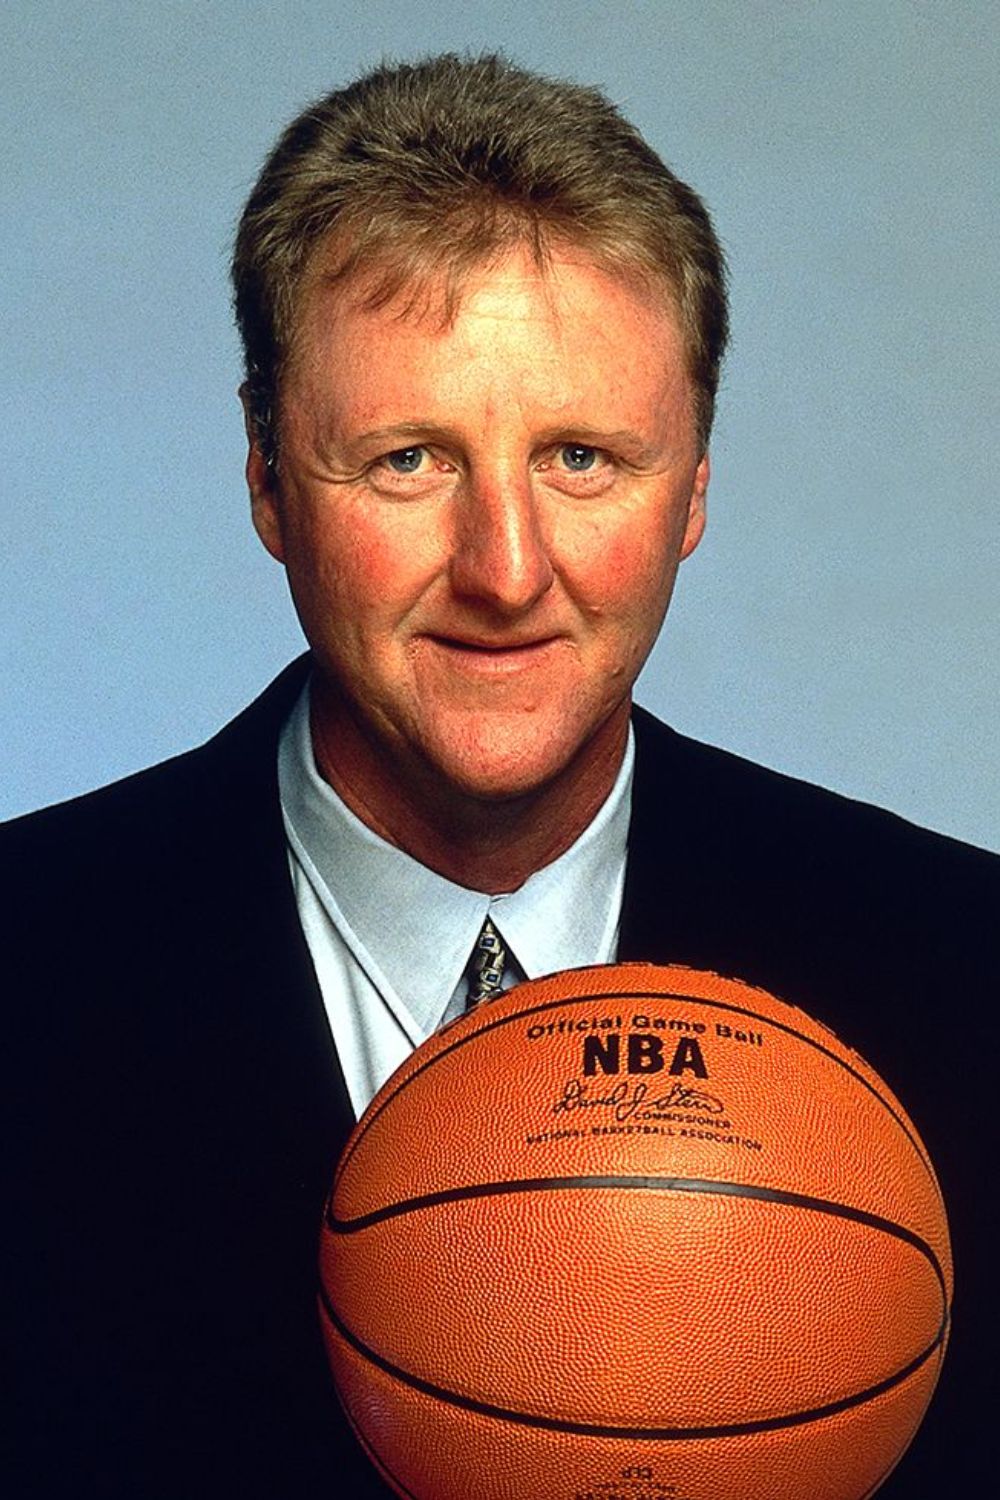 Larry Bird Is Also Known As The Great White Hope